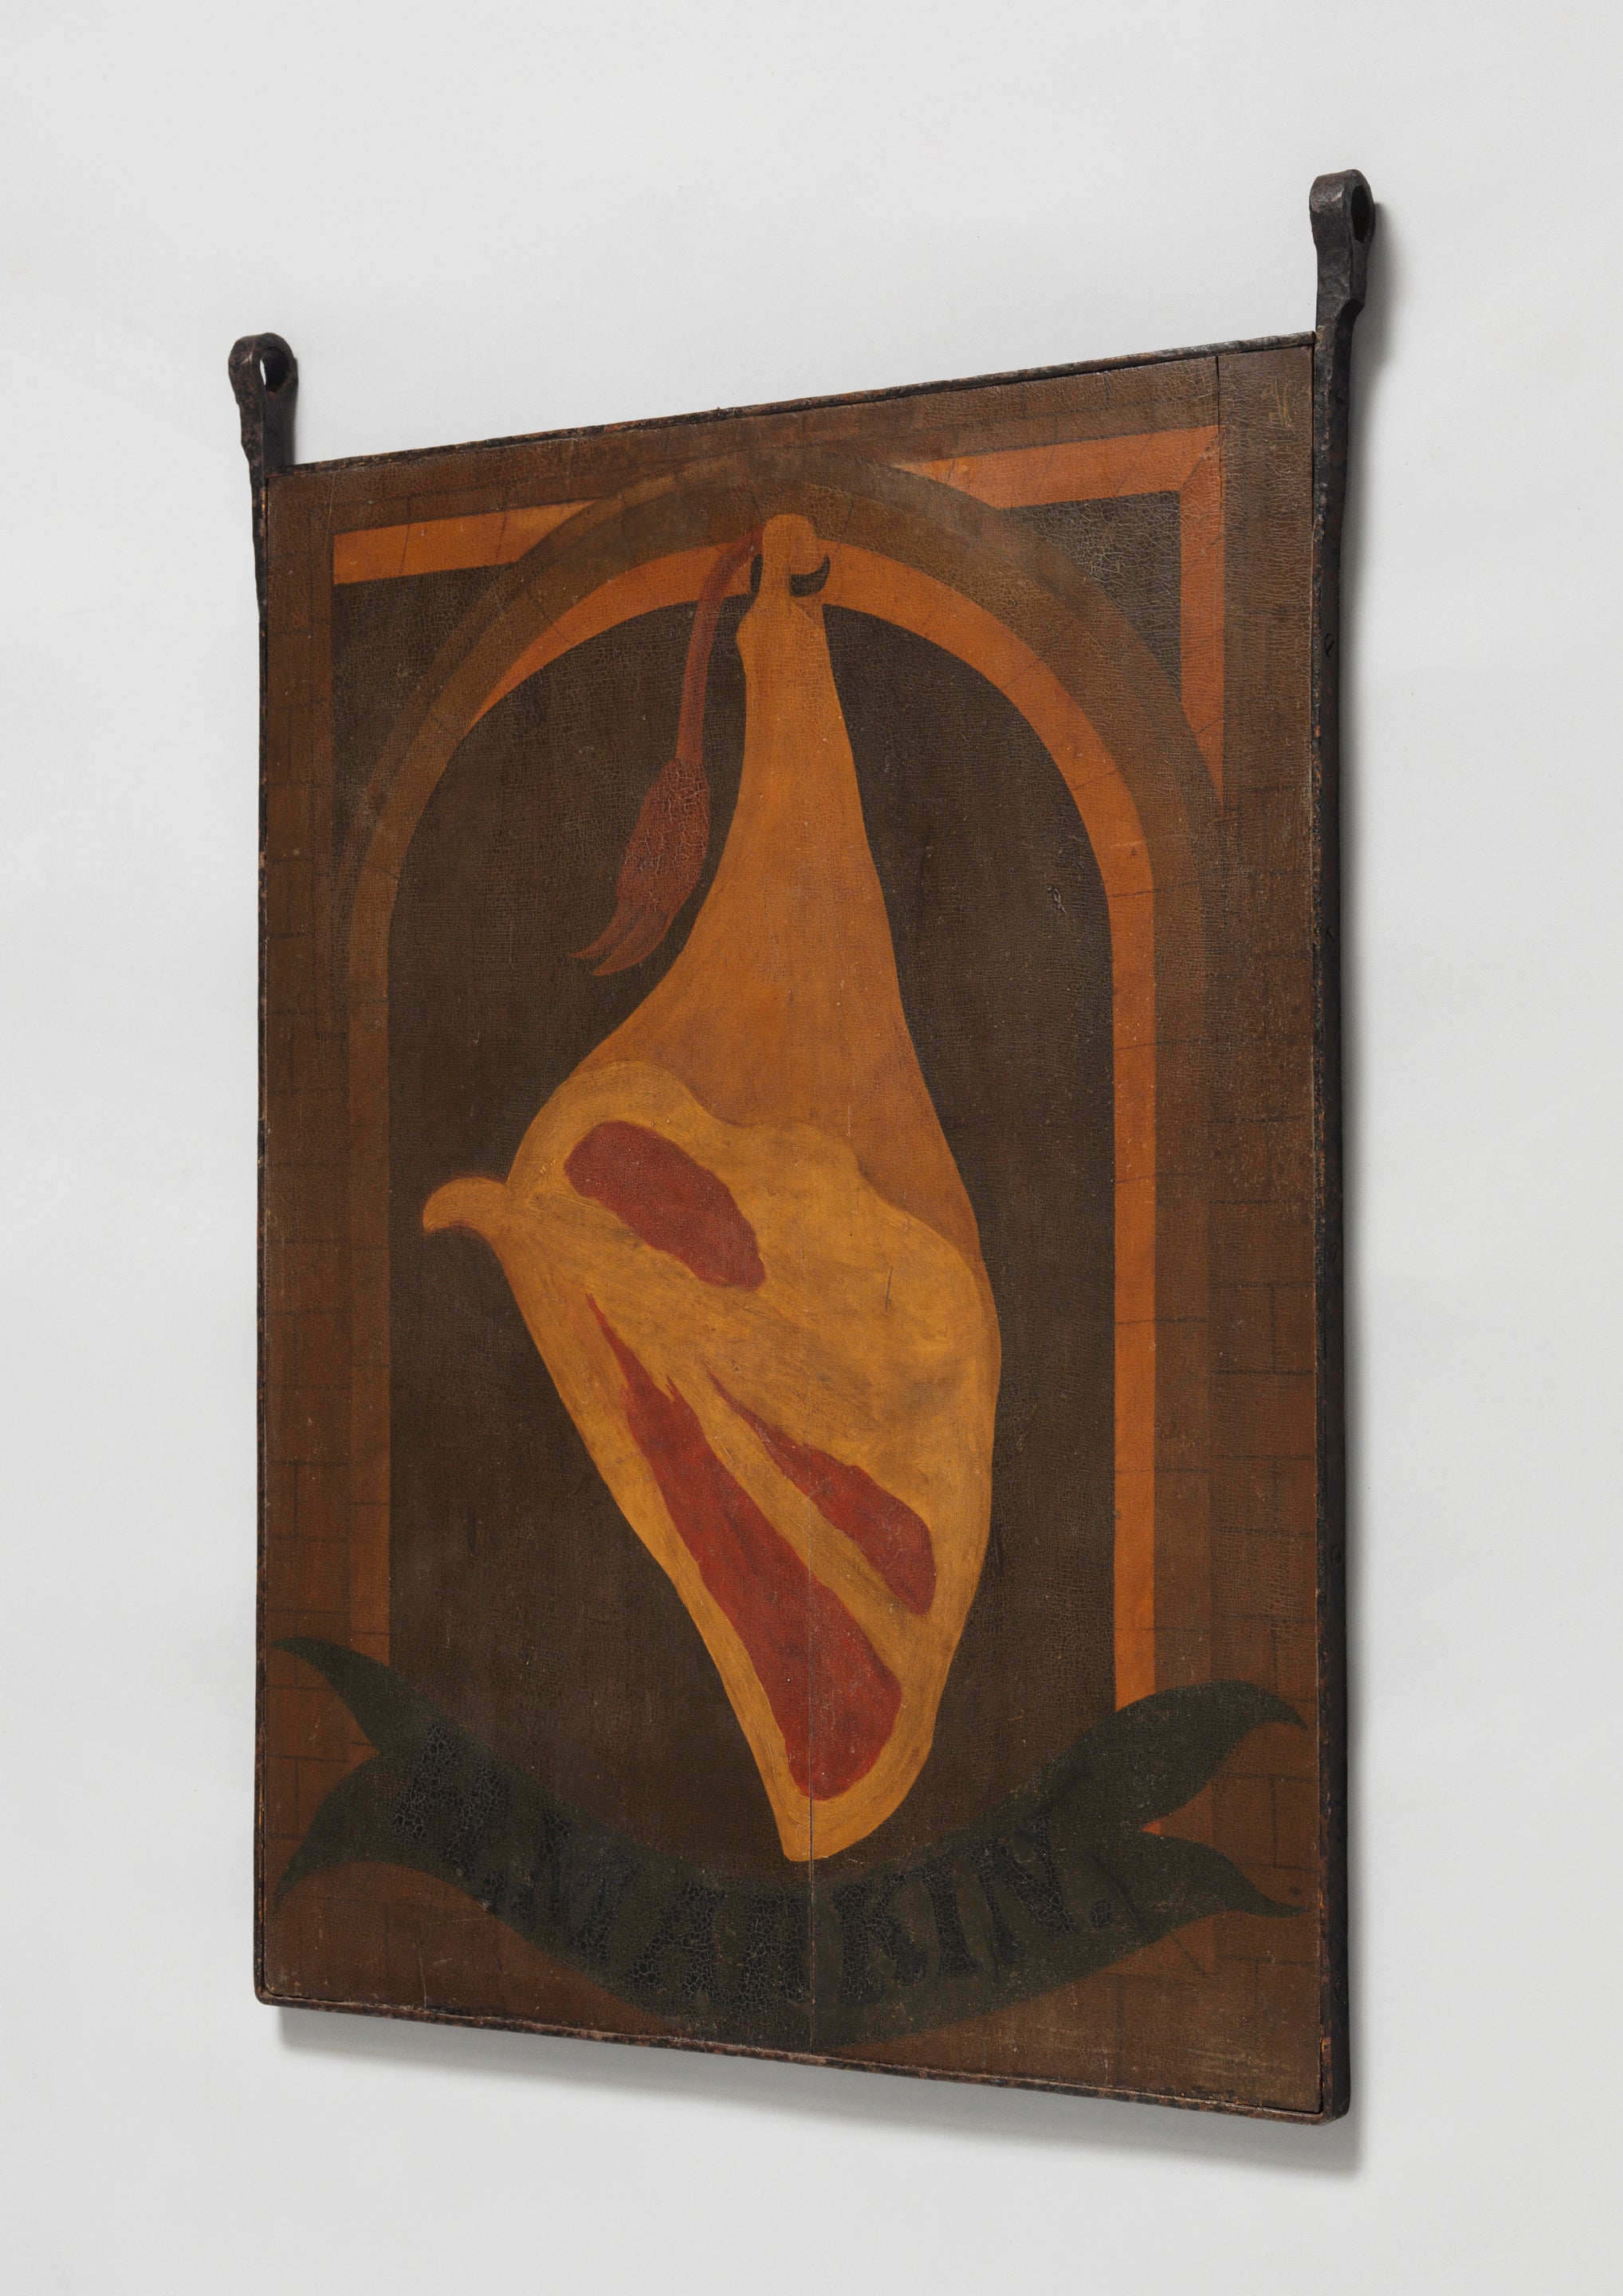 Original Double-Sided Butcher's Trade Sign For 'H.M. ARKIN'.